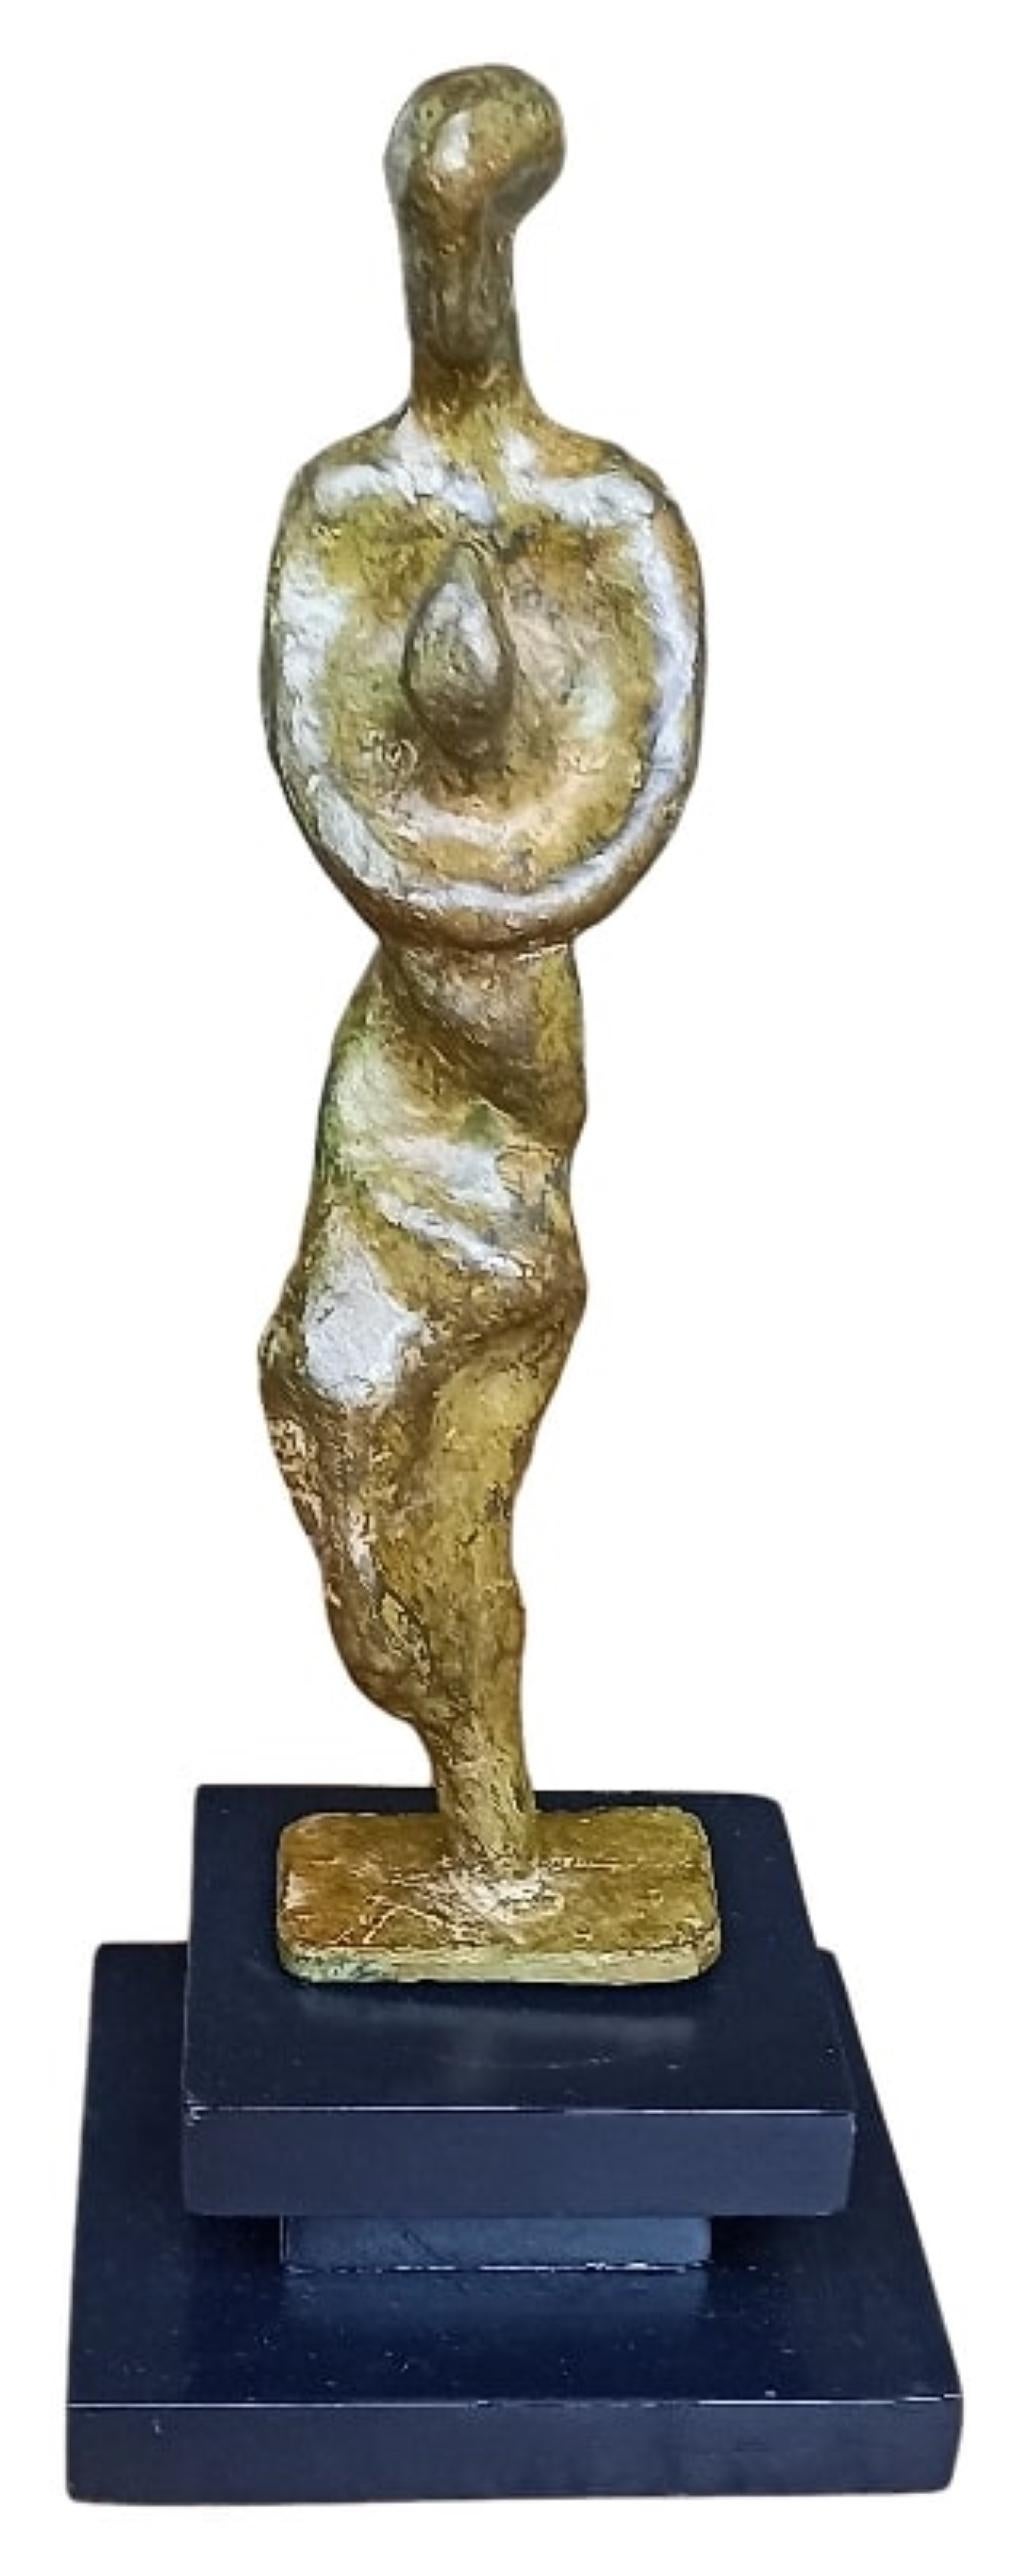 Tushar Kanti Das Roy Abstract Sculpture - Mother & Child, Bronze Sculpture, Figurative by Contemporary Artist “In Stock”